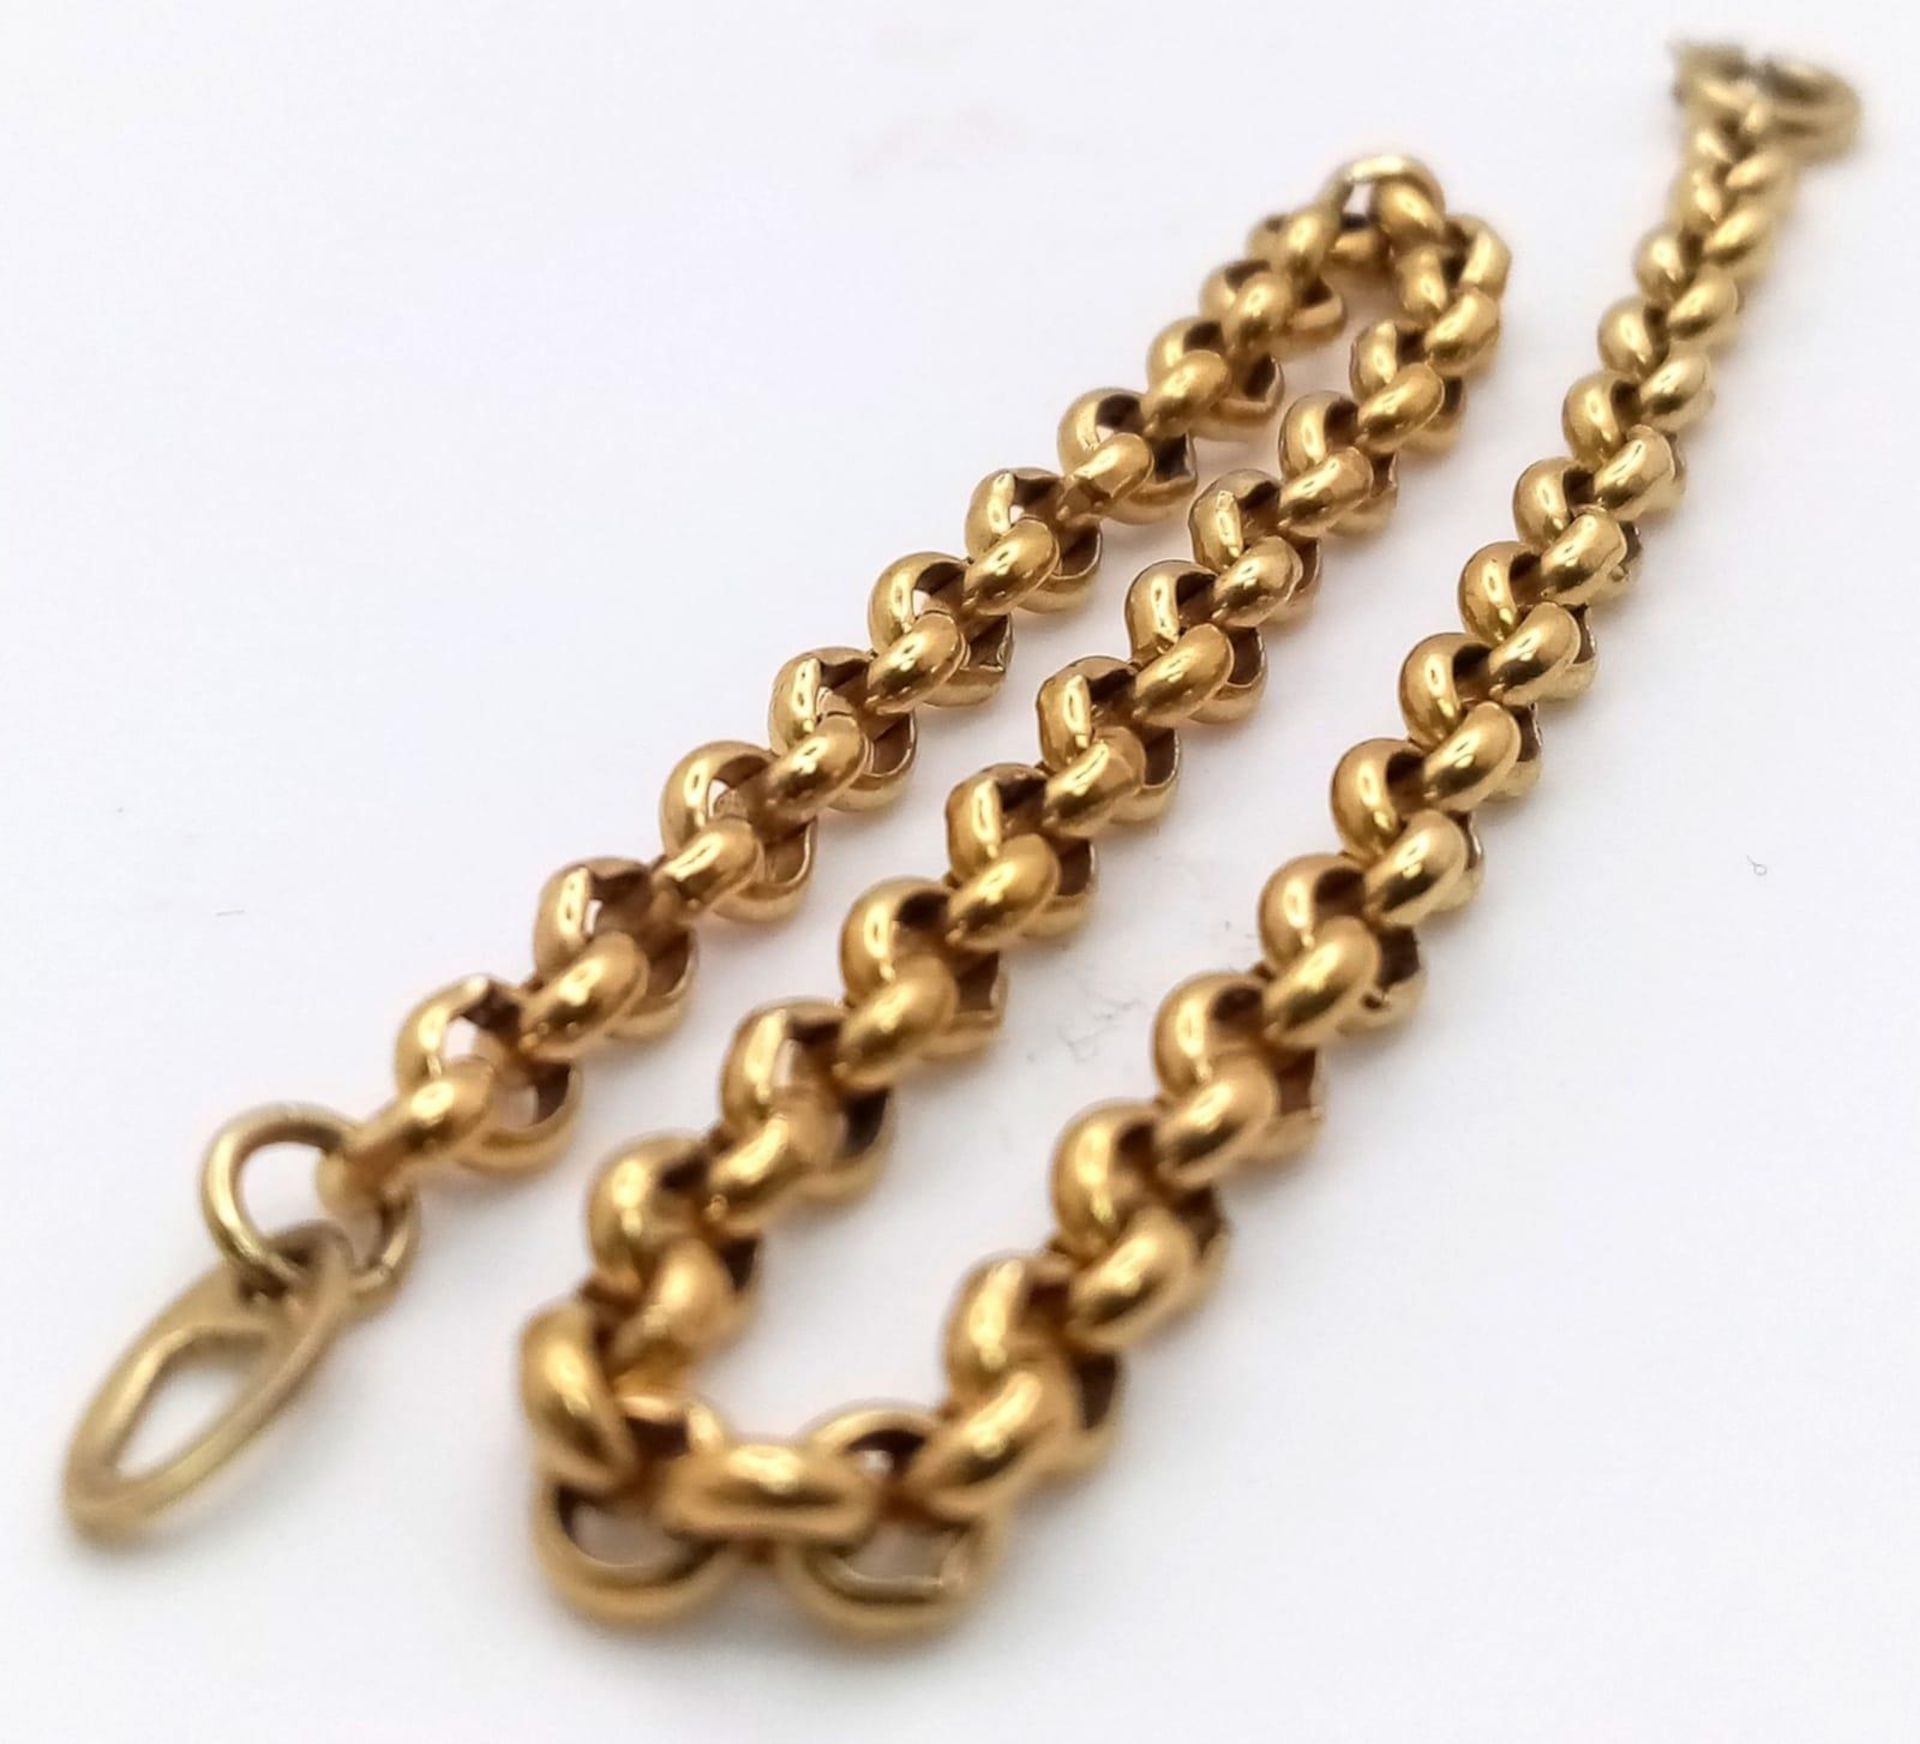 A 9K Yellow Gold (tested) Belcher Link Bracelet. 17cm. 5.5g weight. - Image 3 of 3